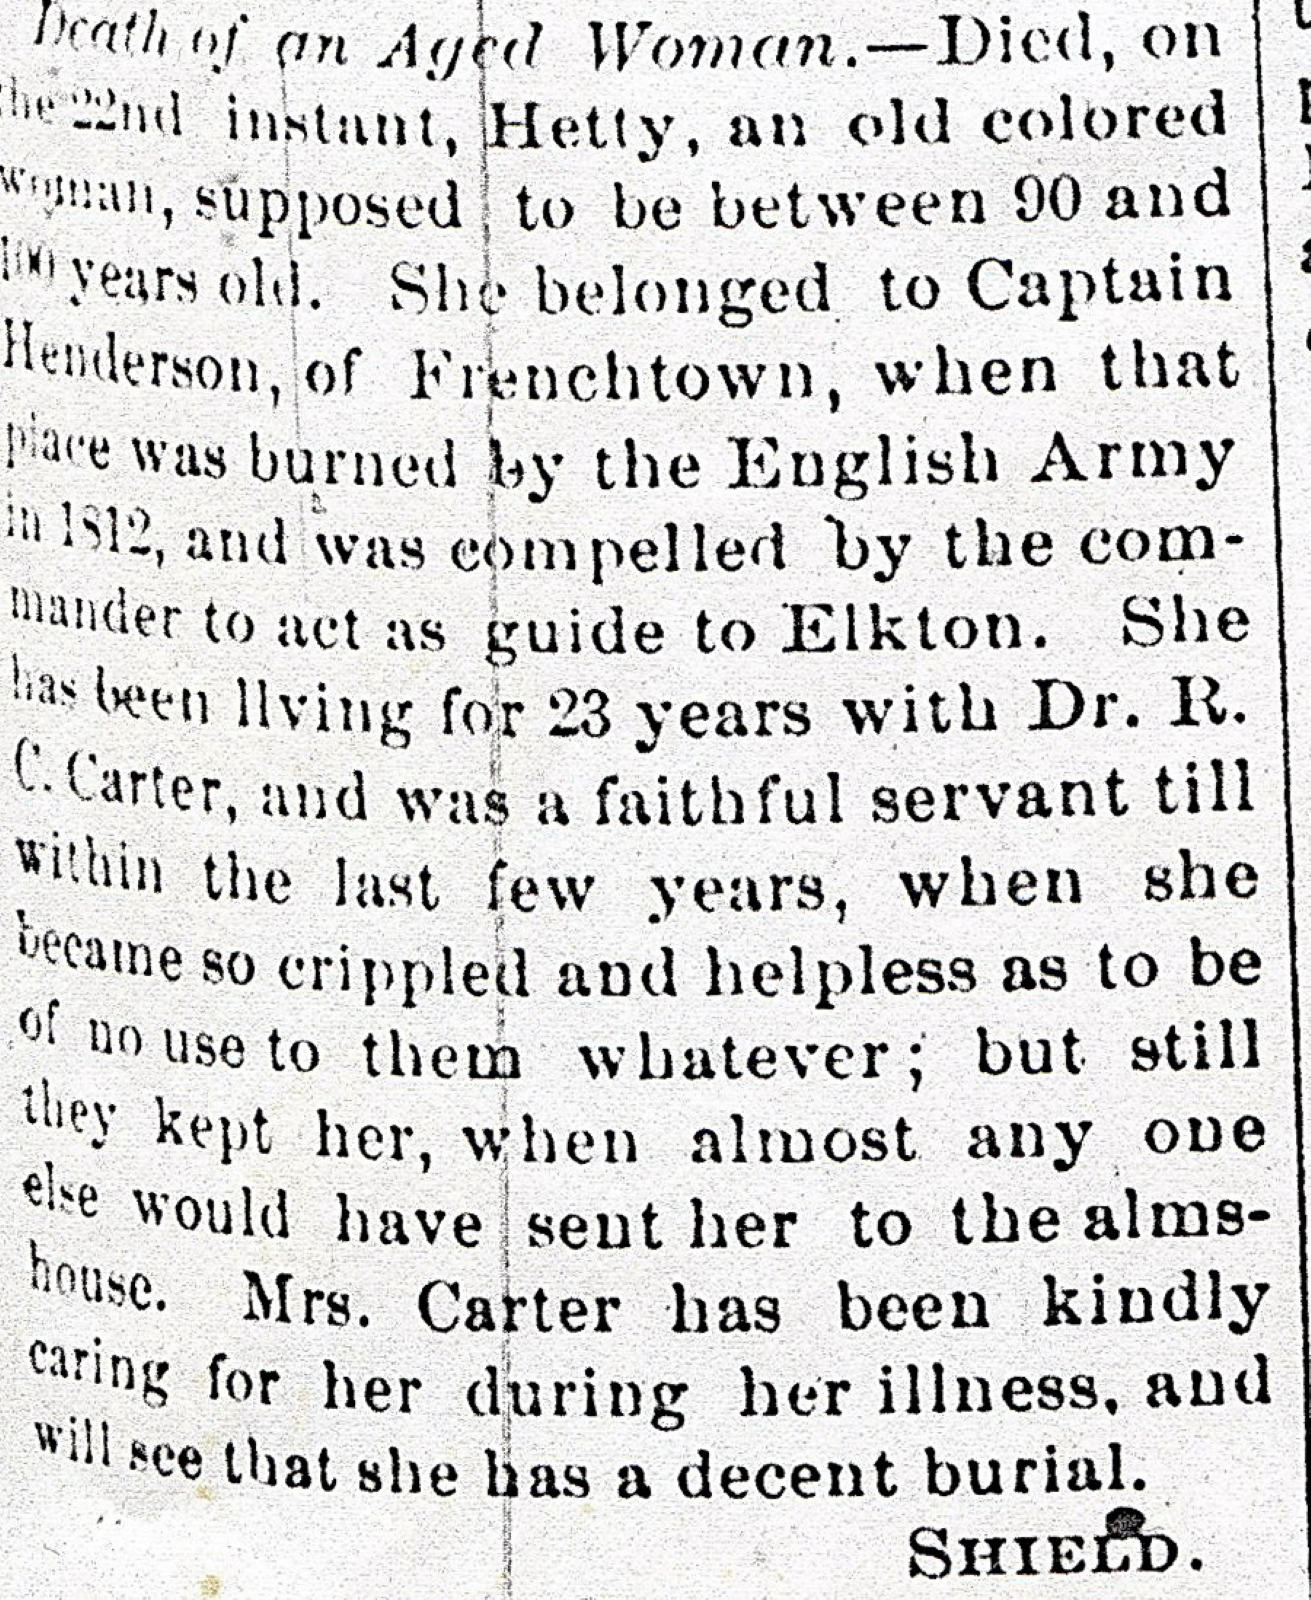 Death of an aged woman. - Died, on the 22nd instant, Hetty, an old colored woman, supposed to be between 90 and 100 years old. She belonged to Captain Henderson, of Frenchtown, when that place was burned by the English Army in 1812.